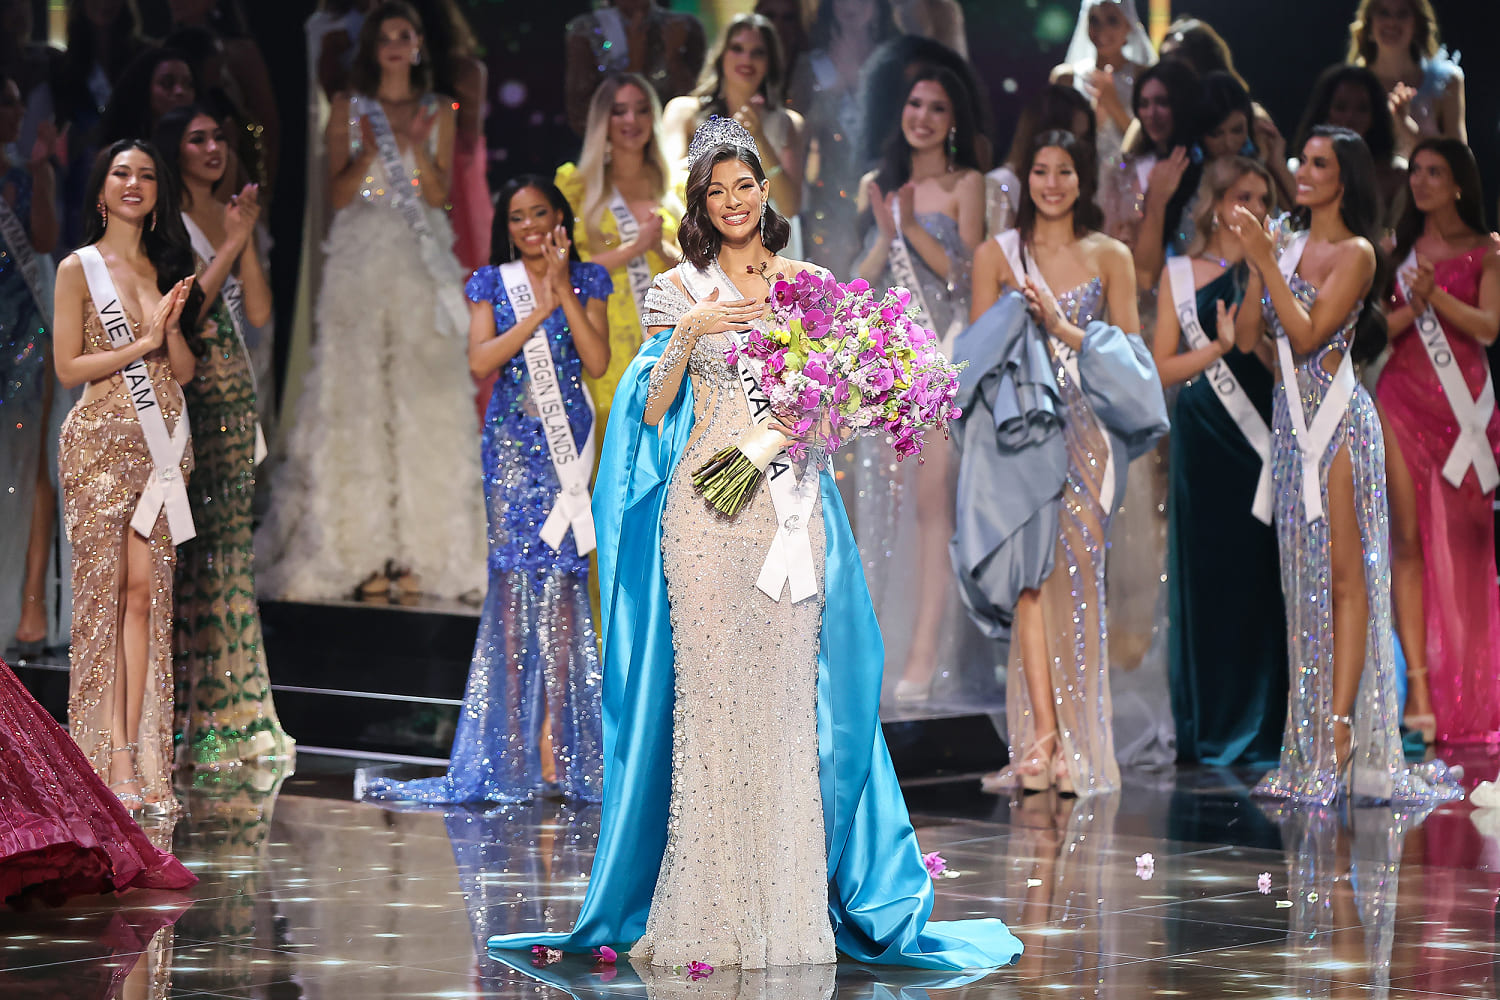 Miss Universe Cuba is back, and hundreds of women of Cuban heritage want the title